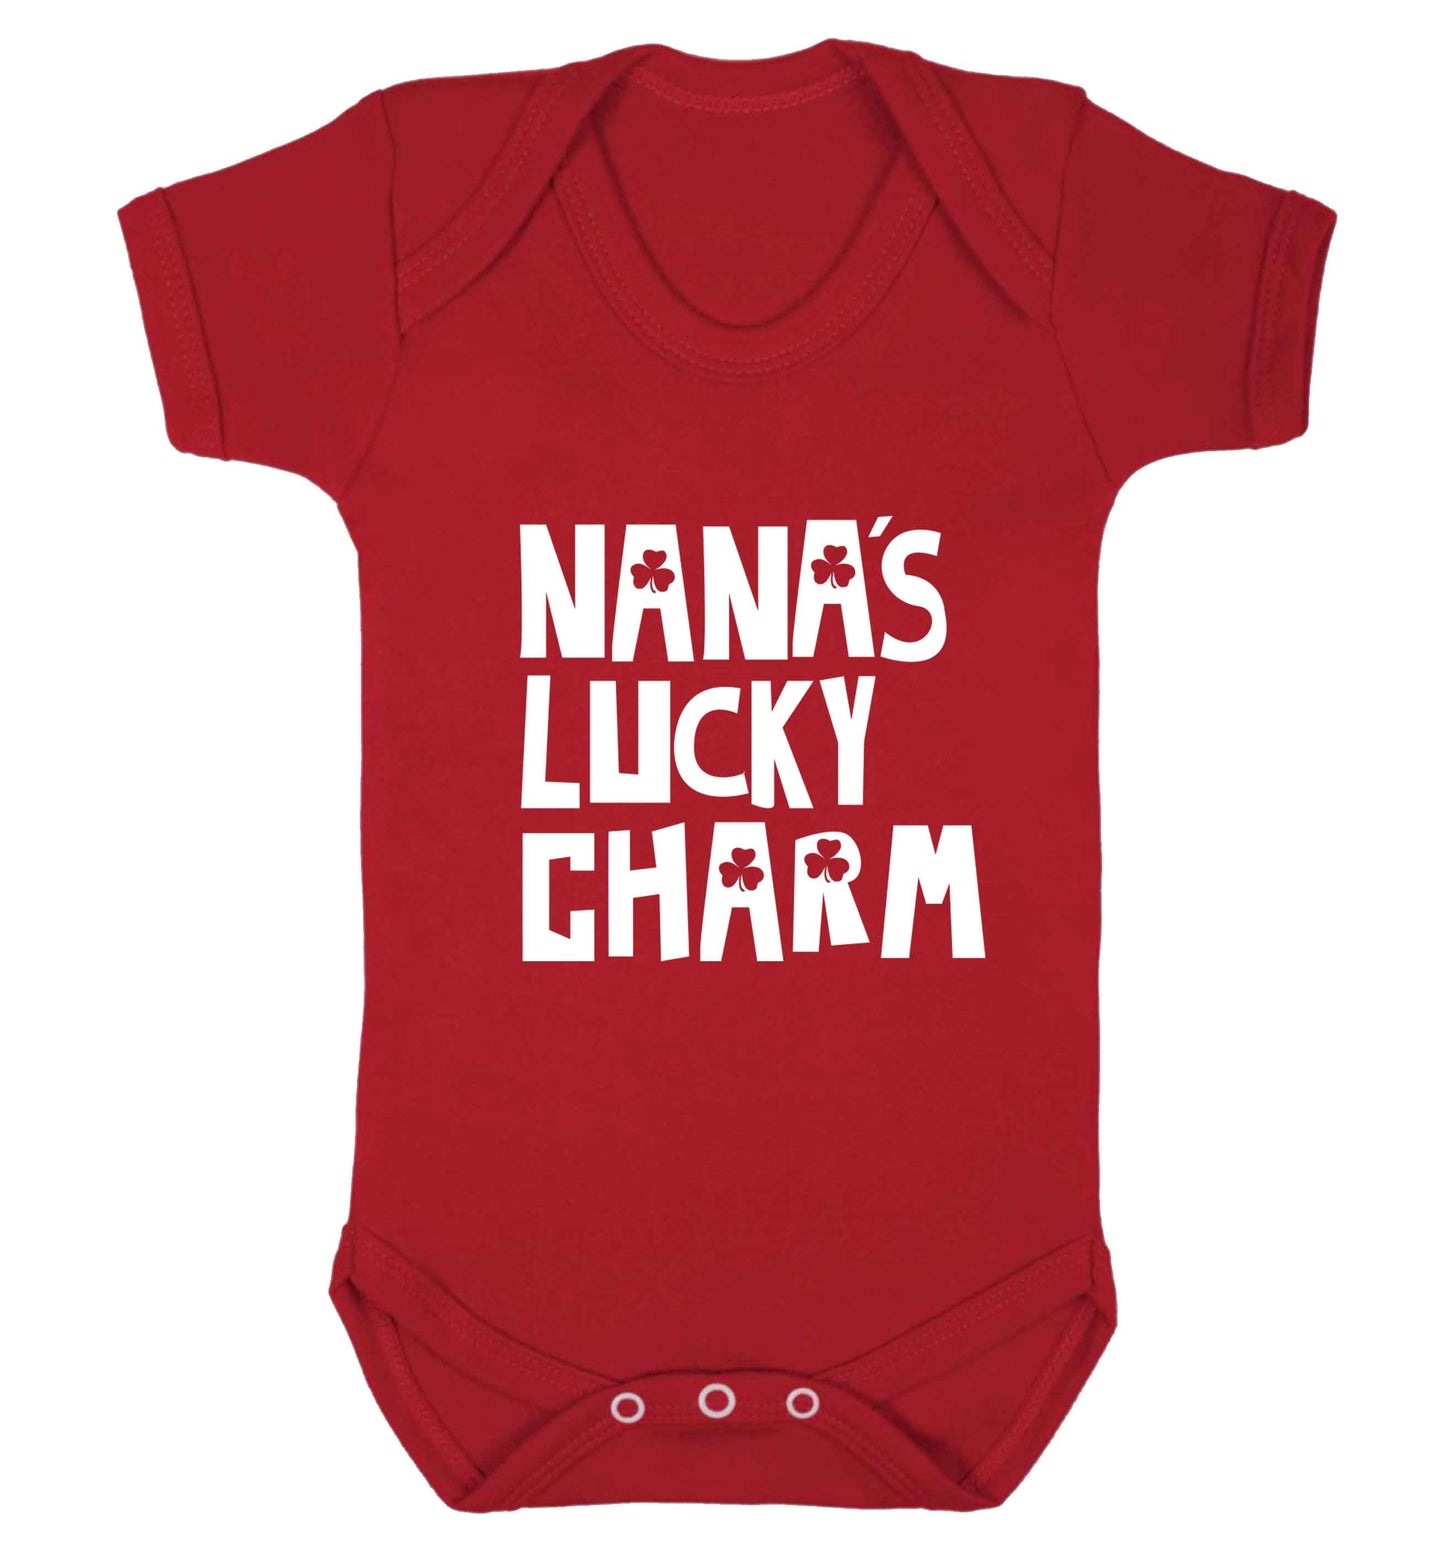 Nana's lucky charm baby vest red 18-24 months